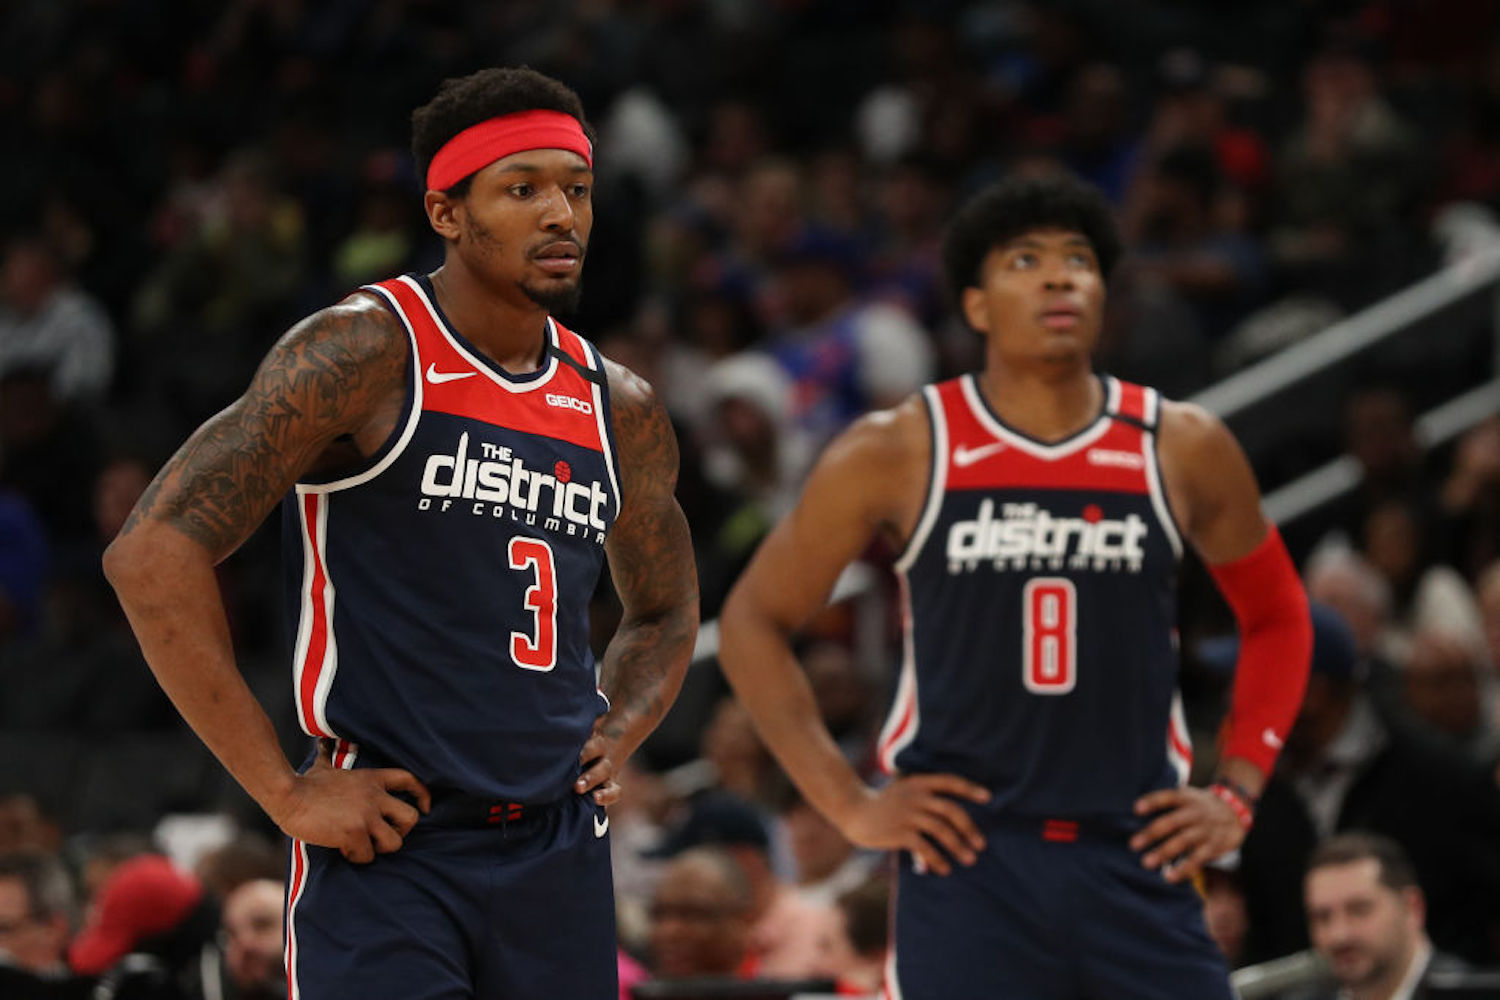 Bradley Beal was the most coveted trade asset this offseason, but more superstars landing on the trading block spells trouble for Beal and the Wizards.